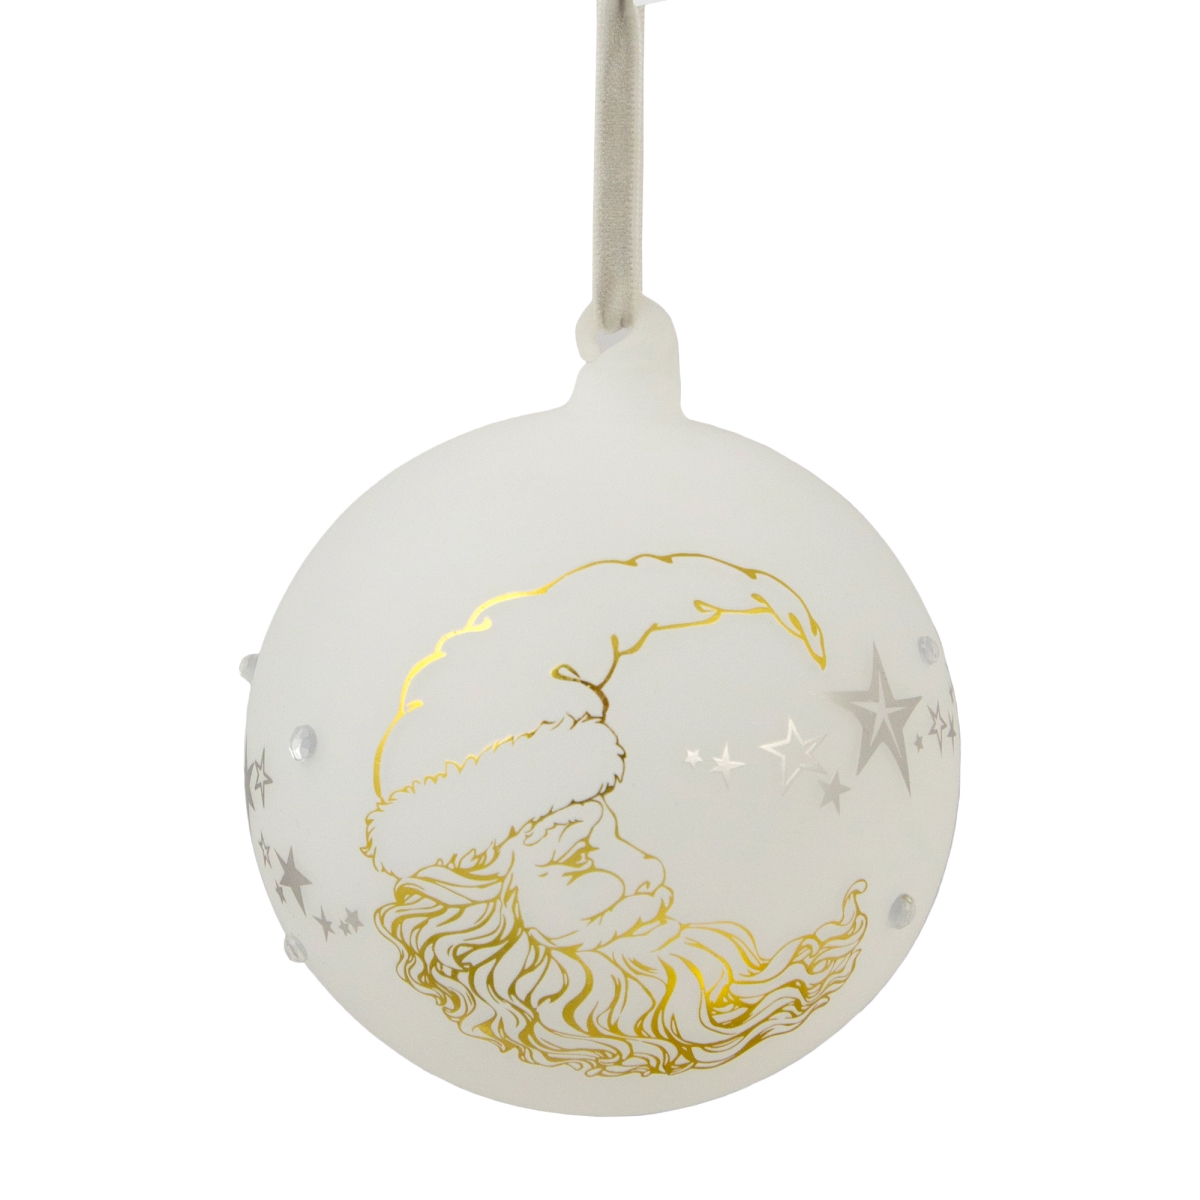 Picture of Northlight 35254051 4.5 in. Moon Santa Glass Christmas Ornament, White